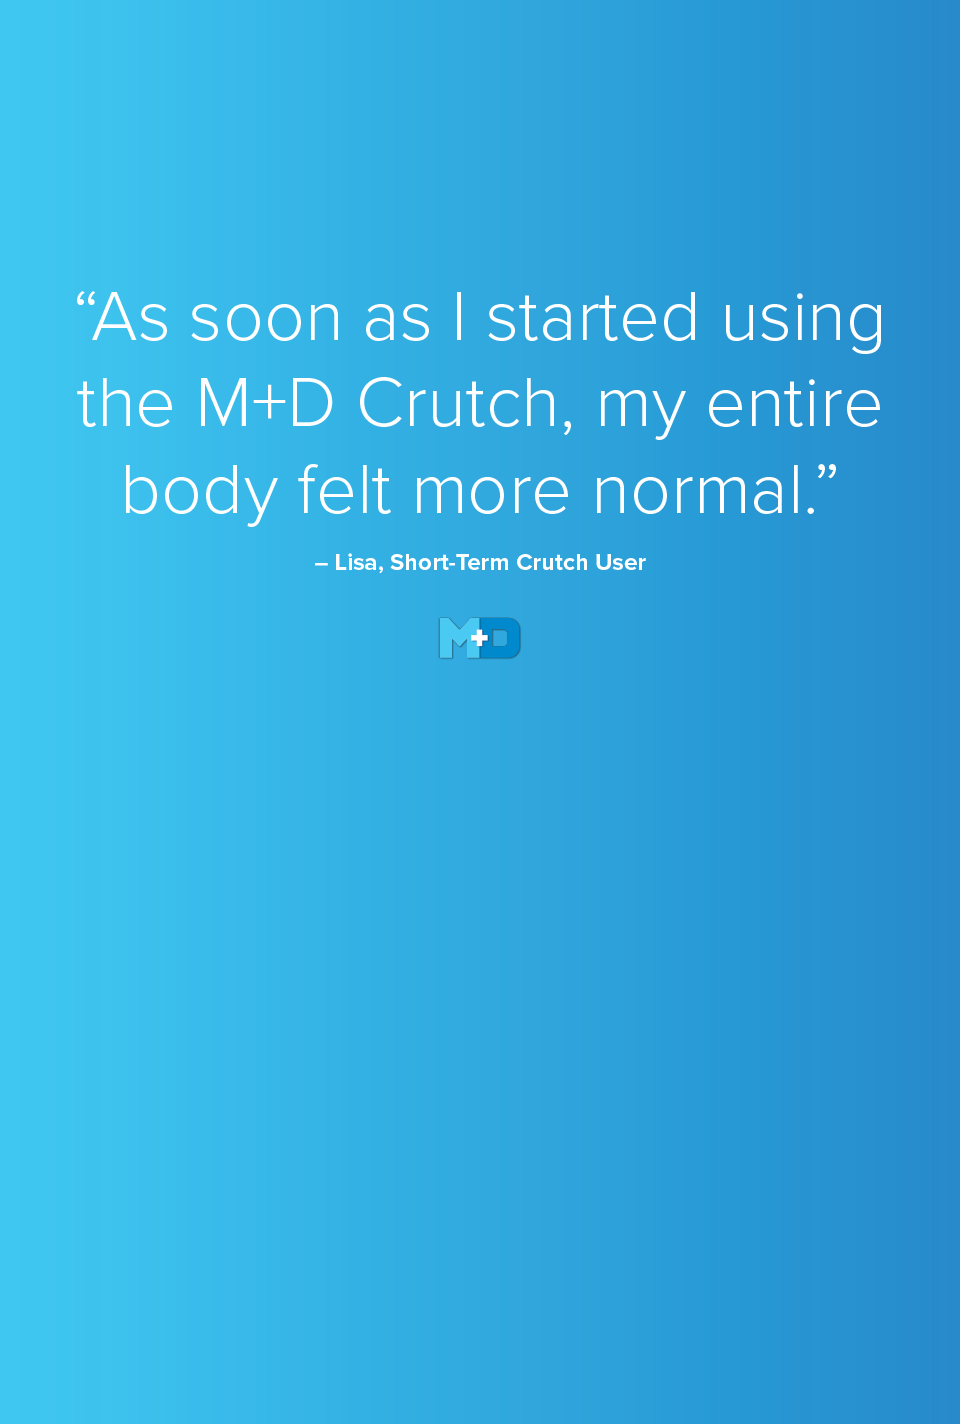 As soon as I started using the M+D crutch, my entire body felt more normal